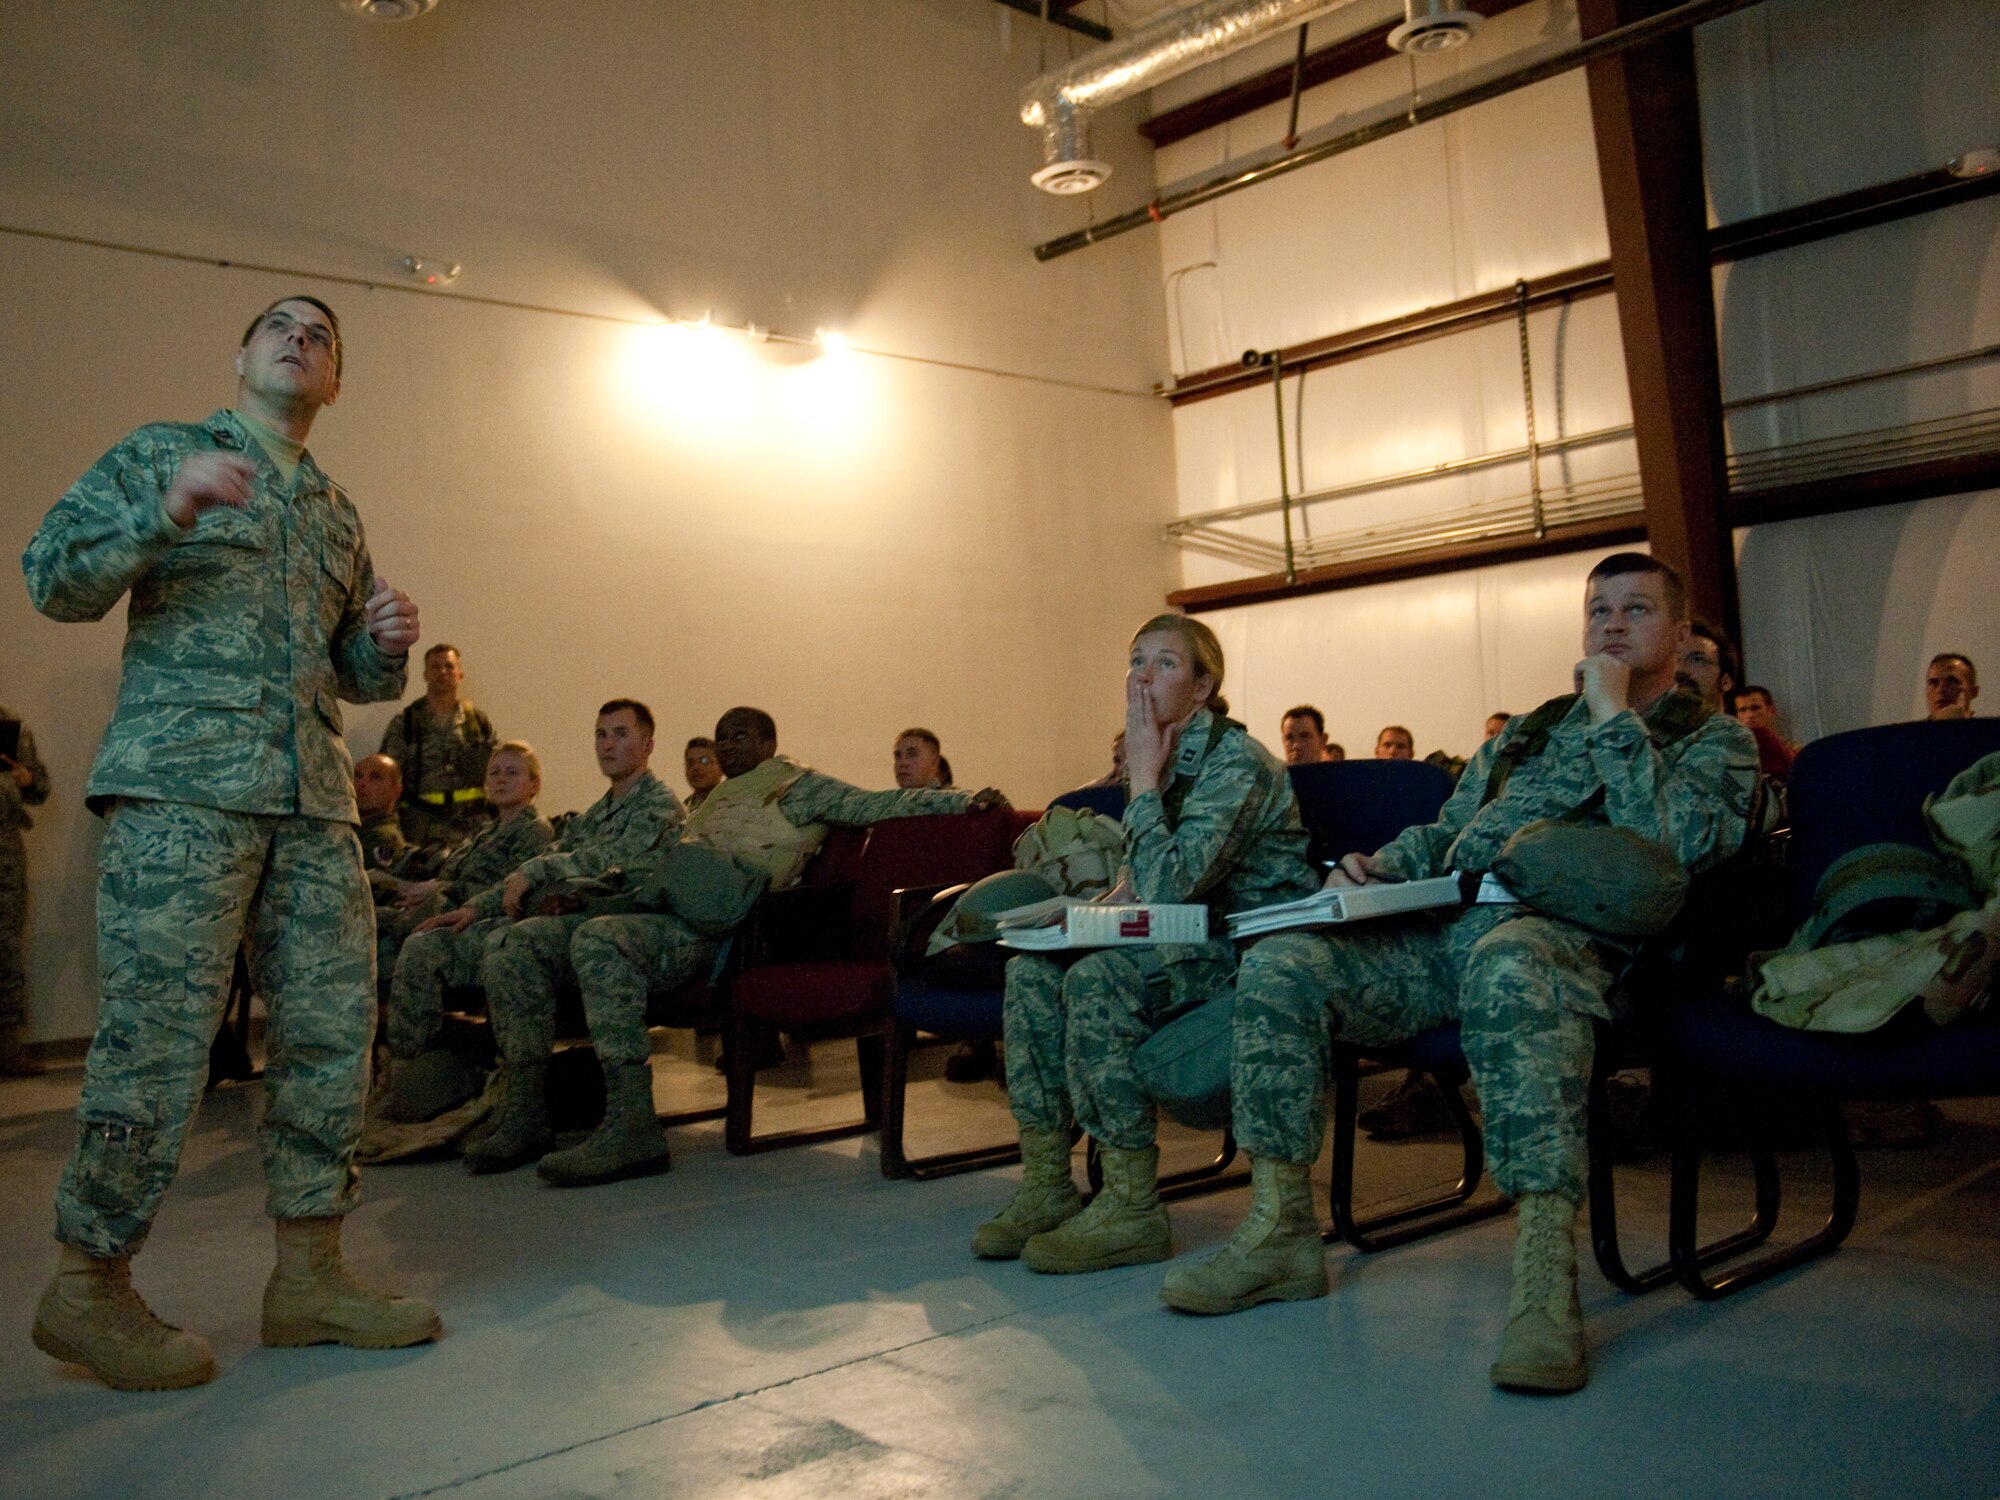 HOLLOMAN AIR FORCE BASE, N.M. -- Capt. Dean Korsak, 49th Wing Legal office, briefs Airmen during a base exercise Jan. 25, 2011, on the legal assistance available to them. During the exercise, Airmen selected to deploy must process through the personnel deployment facility to ensure they are prepared. These exercises are designed to test an Airman's ability and readiness to deploy. (U.S. Air Force photo by Senior Airman Veronica Stamps / Released